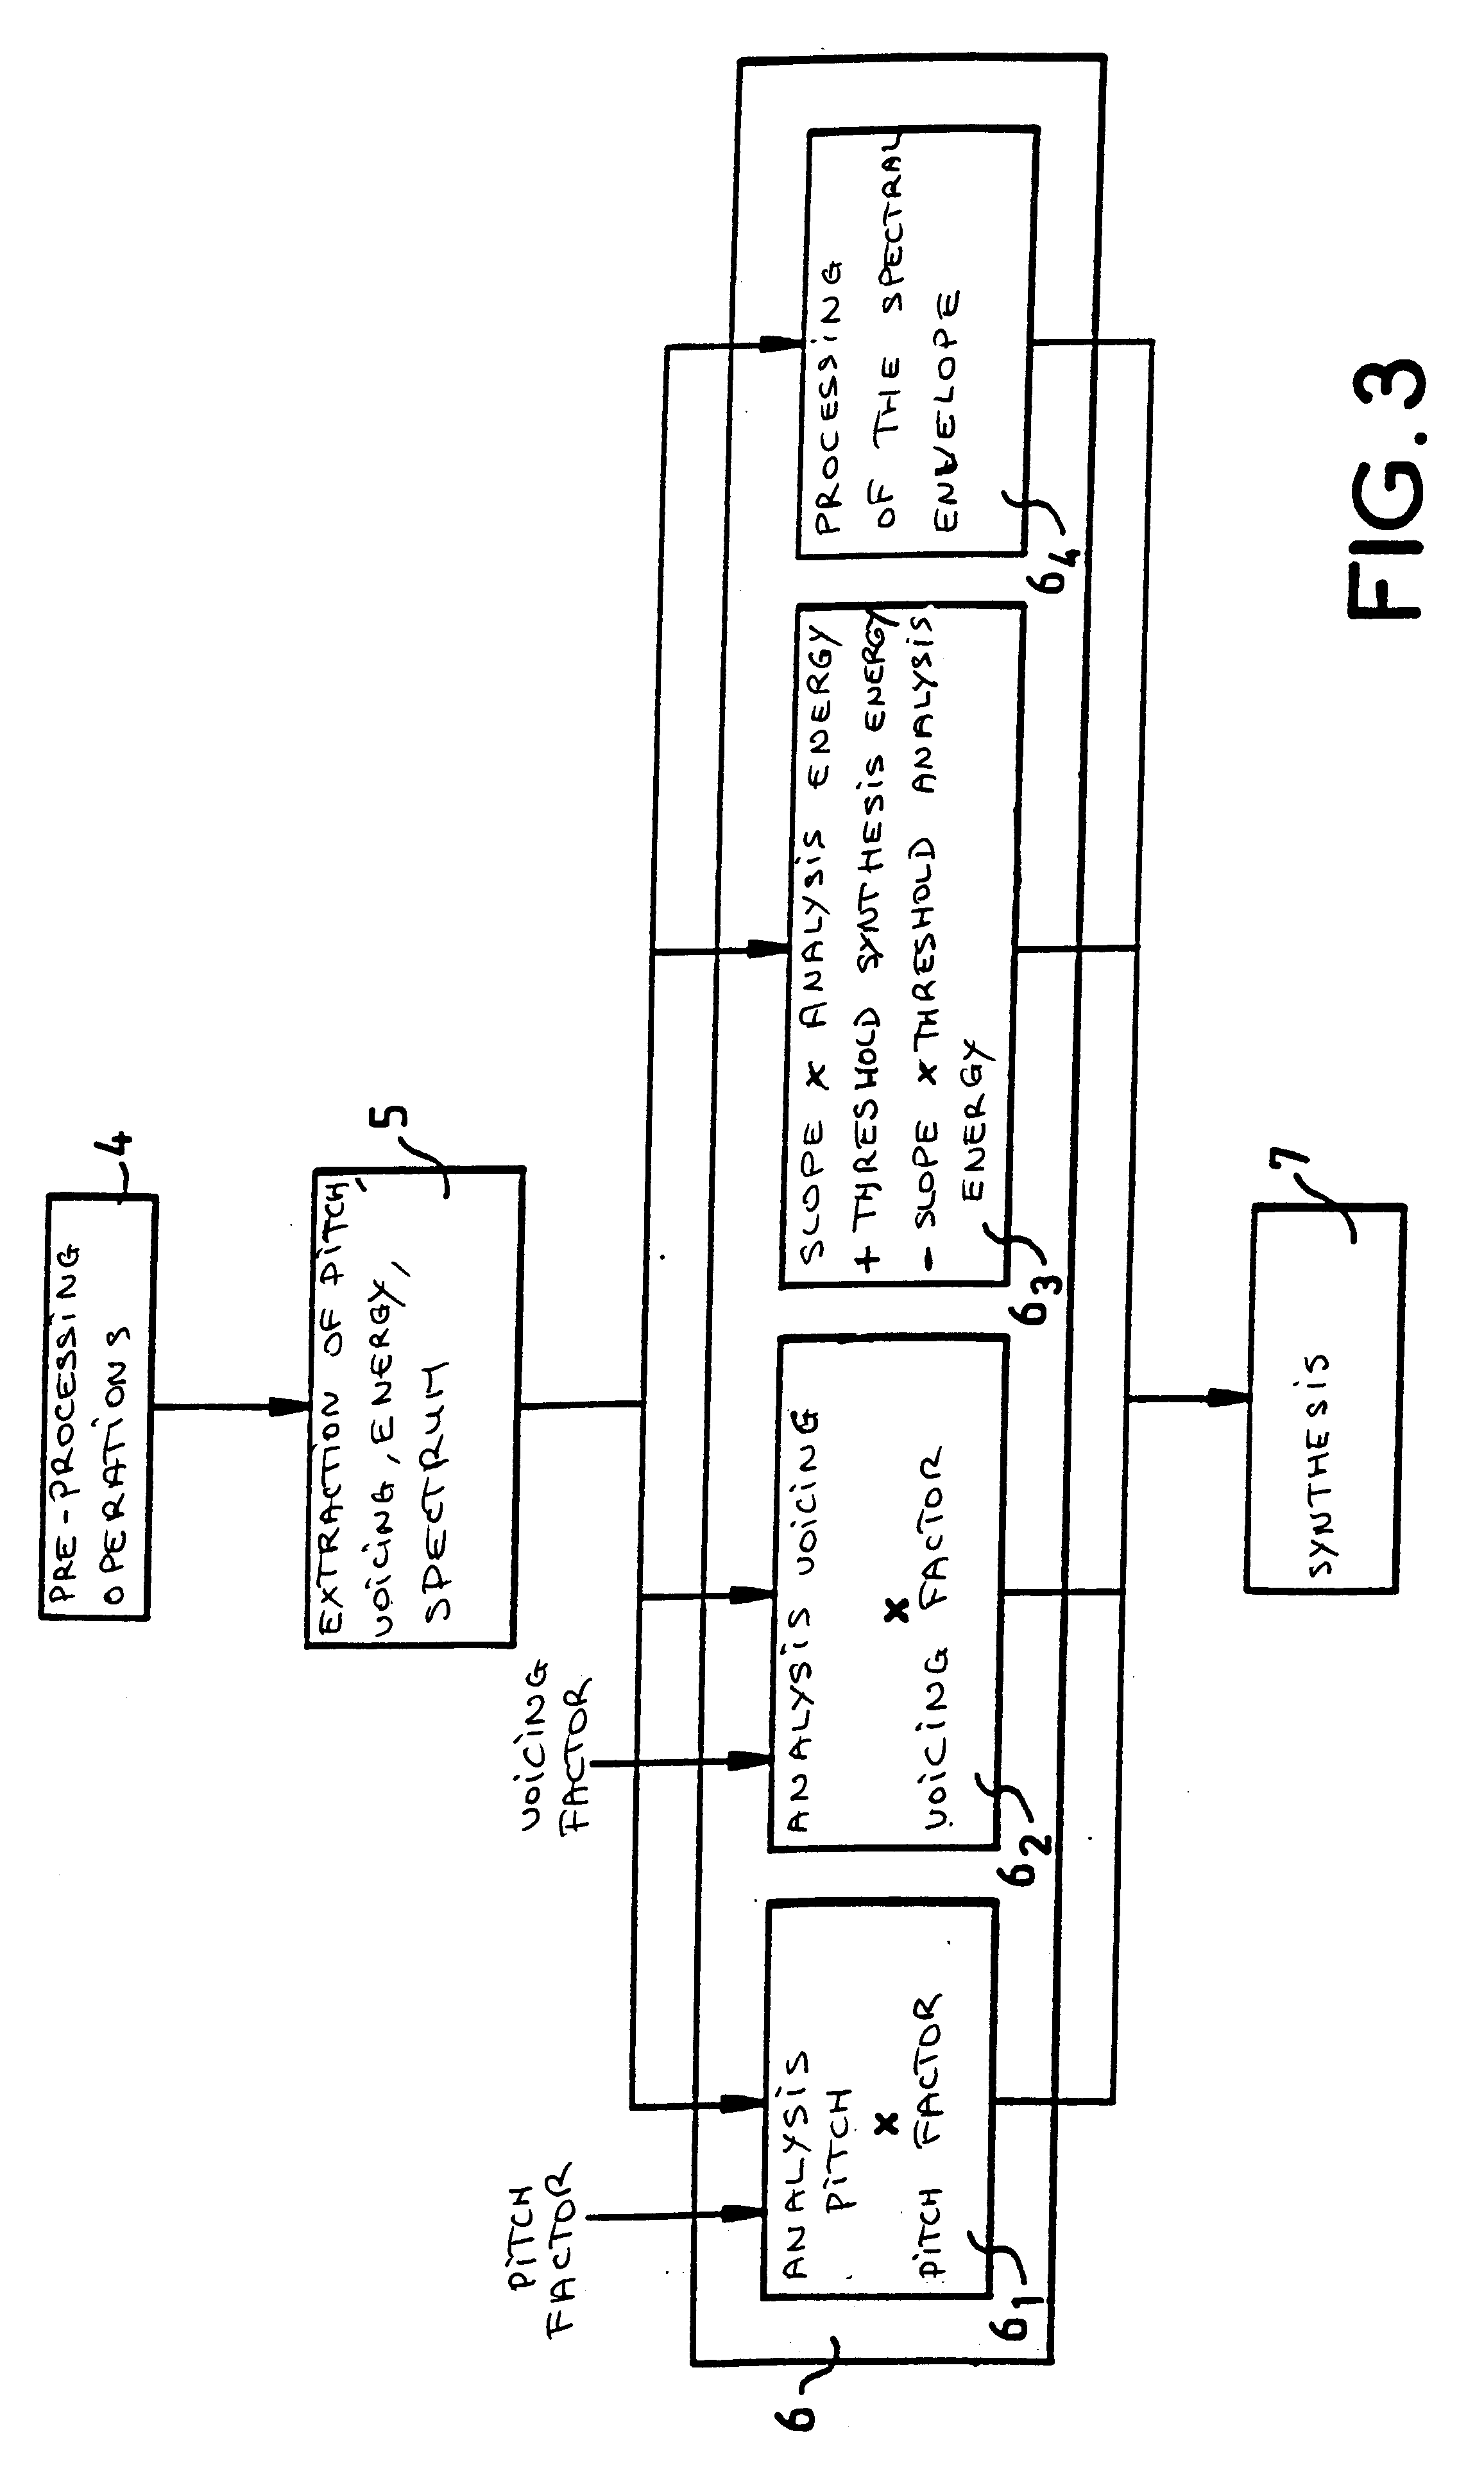 Method and device for the processing of sounds for auditory correction for hearing impaired individuals